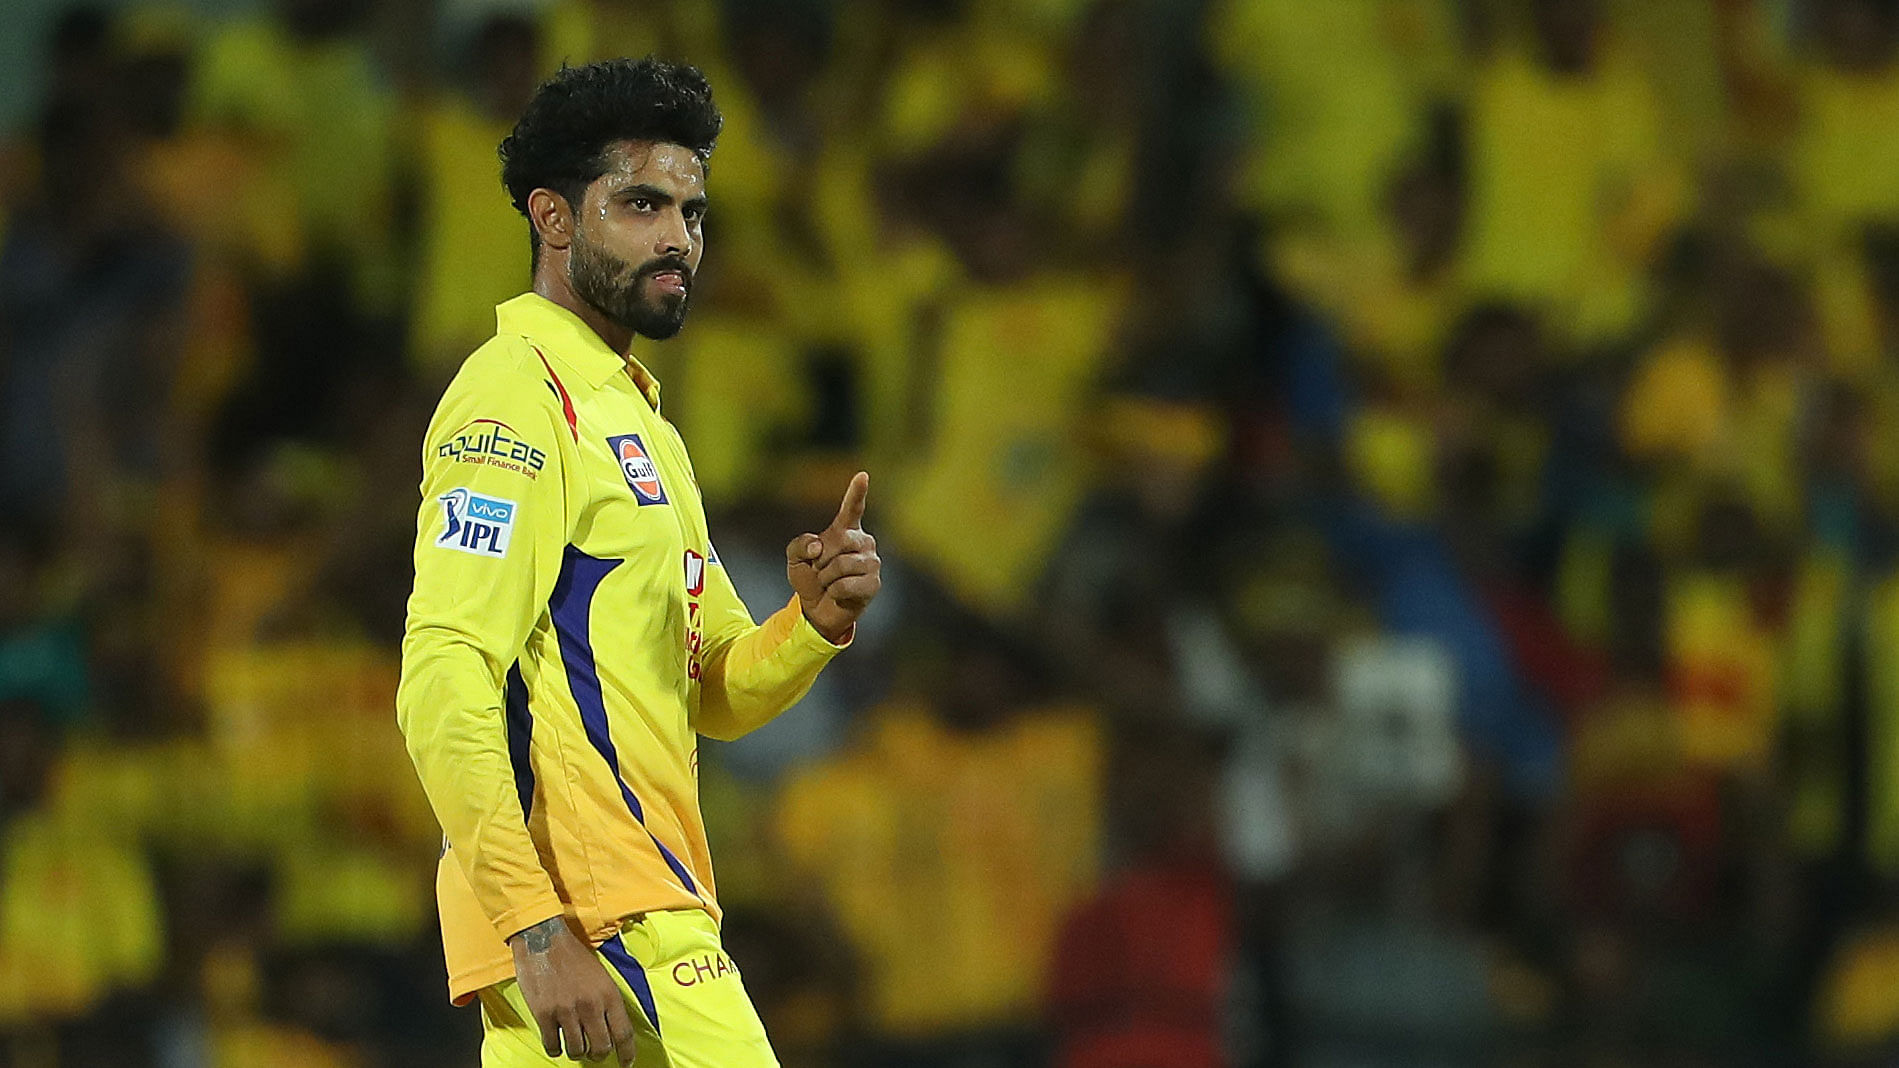 A shoe was hurled at Indian cricketer Ravindra Jadeja during an IPL match.